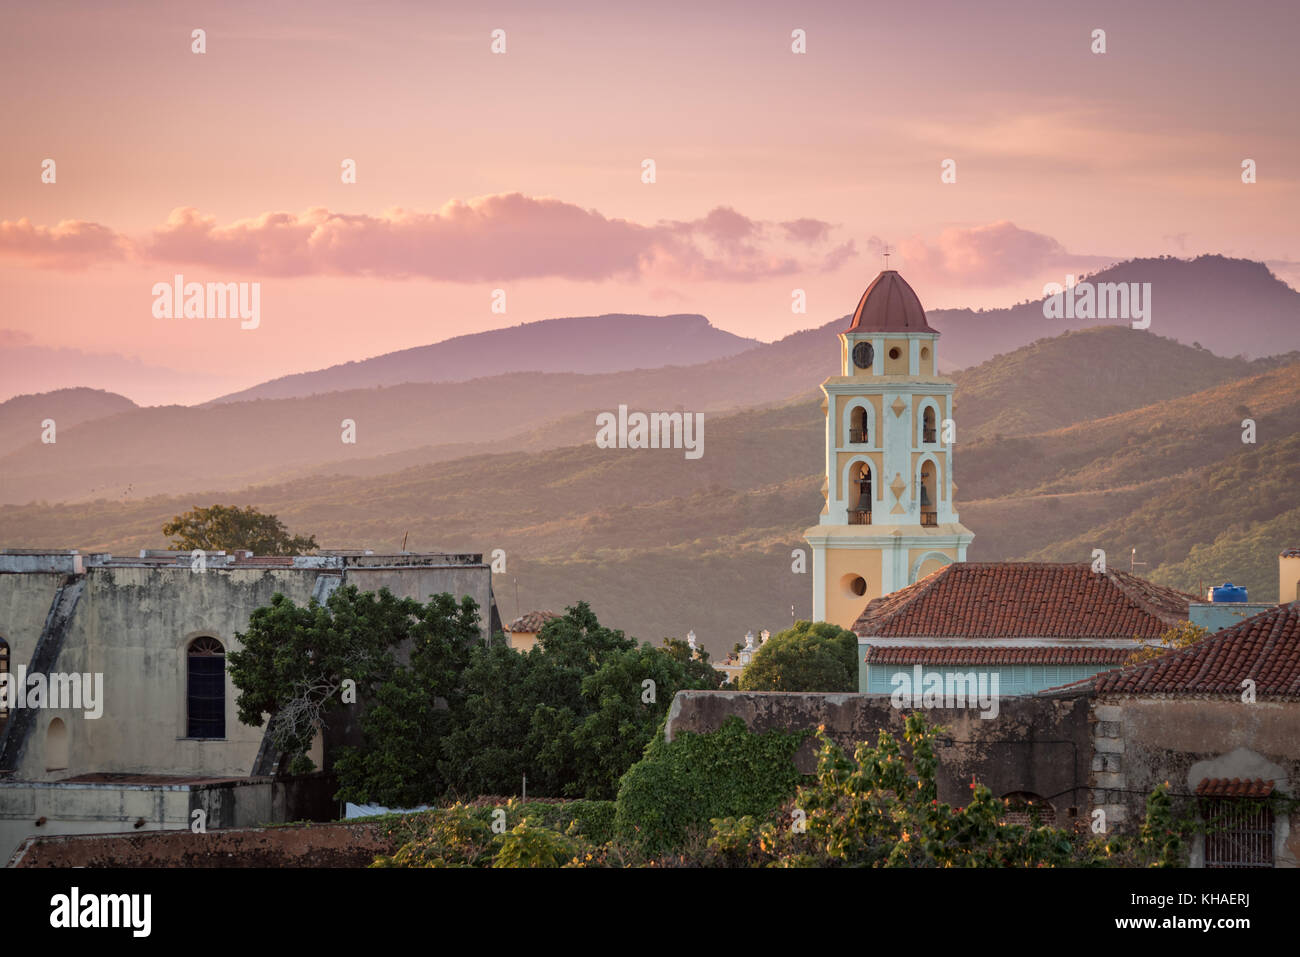 Sunset touching the church and mountains at Trinidad, Cuba Stock Photo